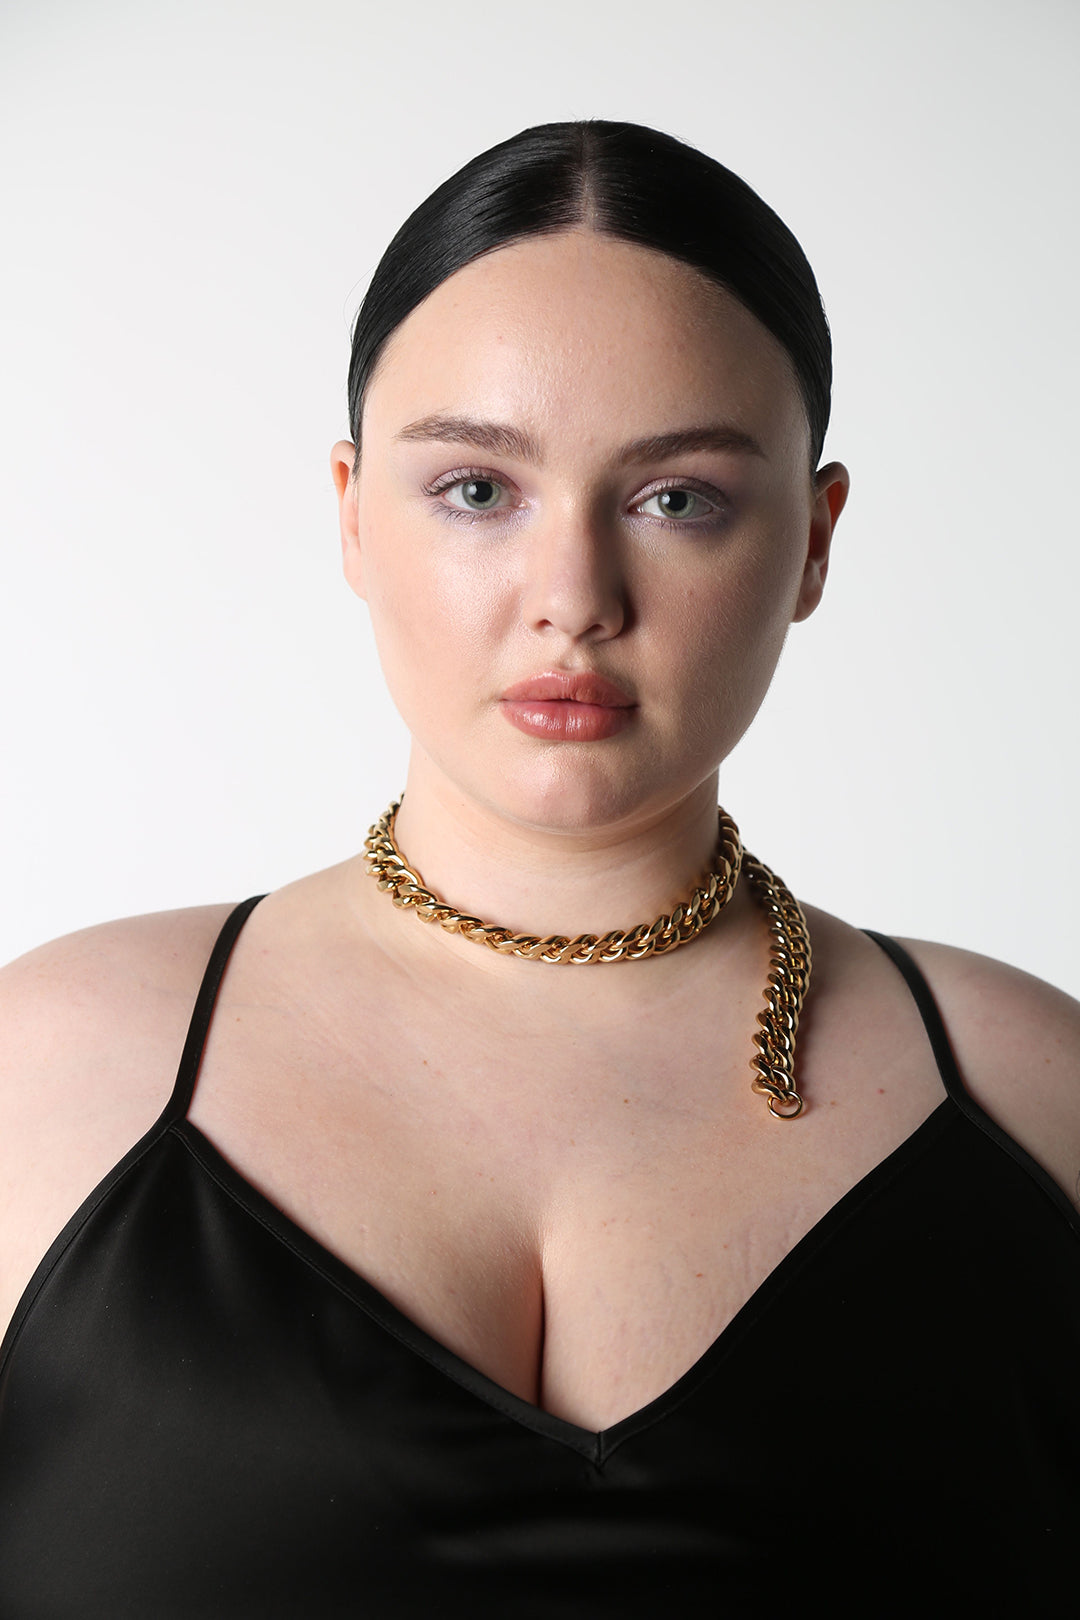 Image on Model - Our Cuban Gold Chain Link can be worn in so many ways. It is adjustable any length up to 24.5".  With its lobster claw clasp, you can wear it as a choker, full length, or double up as a bracelet. If you buy one piece of jewelry this season - this is the one.   A timeless, statement piece with a deep gold shine. Perfect for almost any occasion or your everyday finishing touch to your outfits.